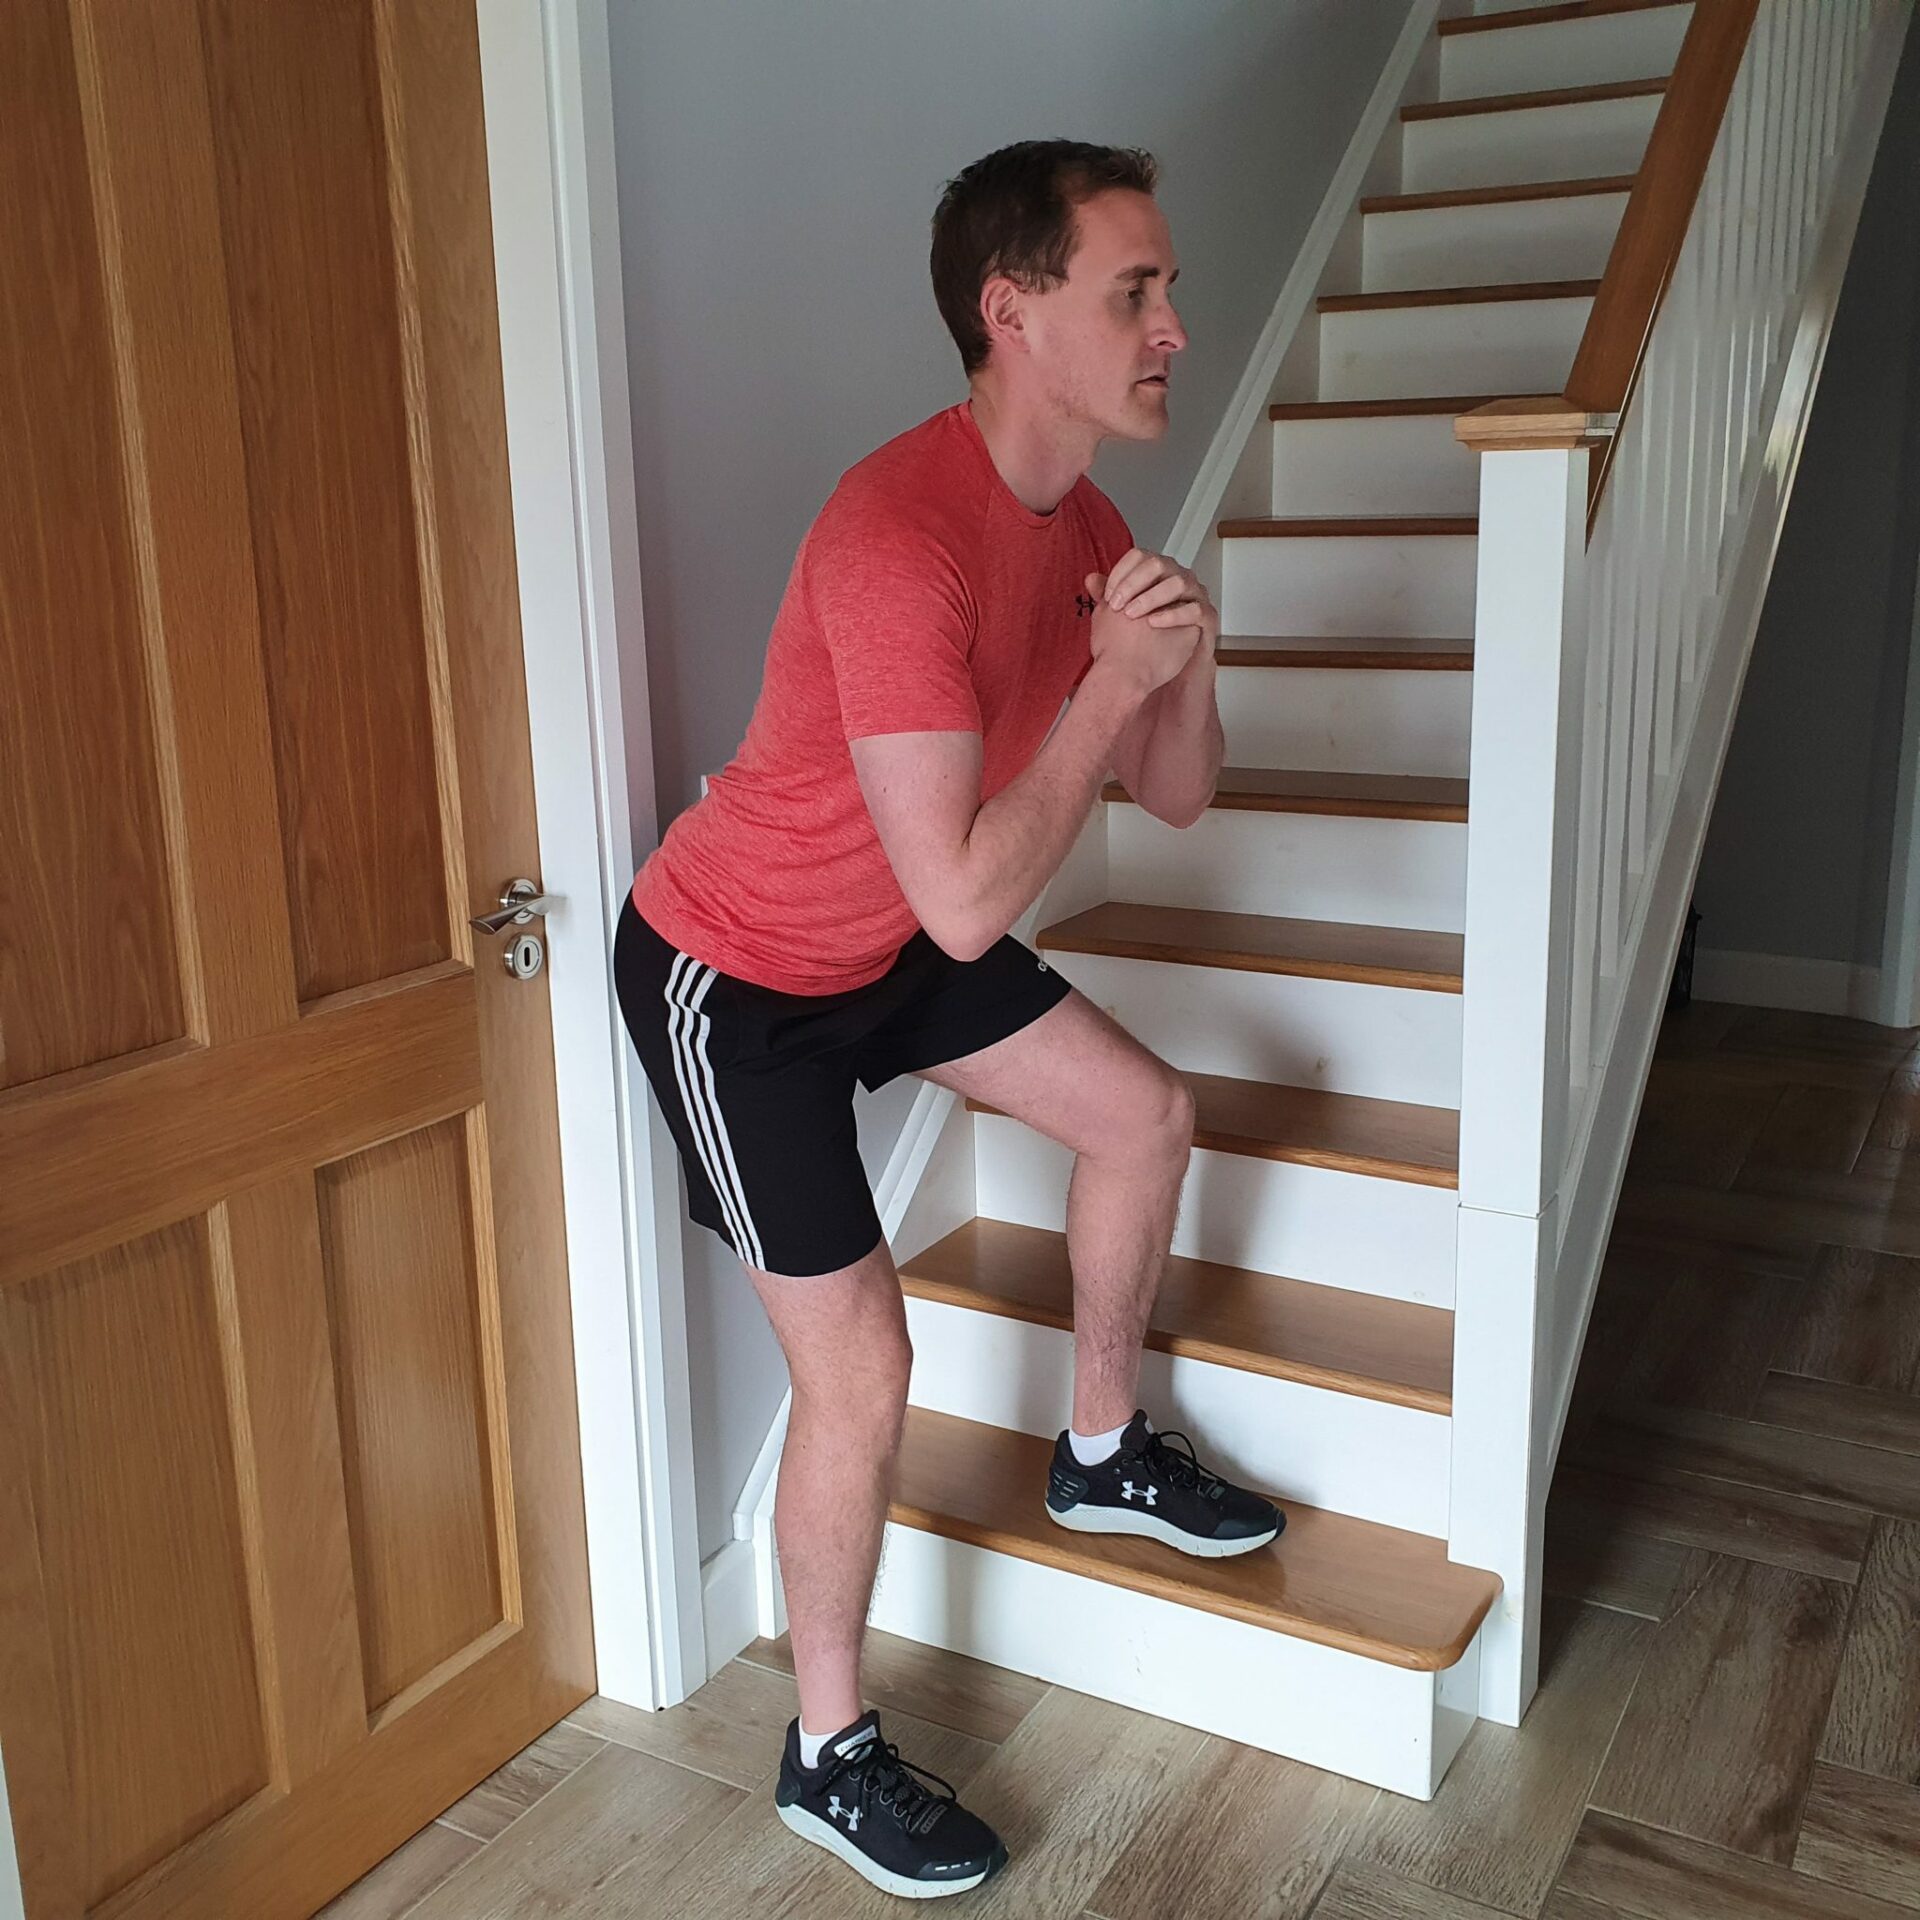 Home Workout No.1 – March 16th 2020